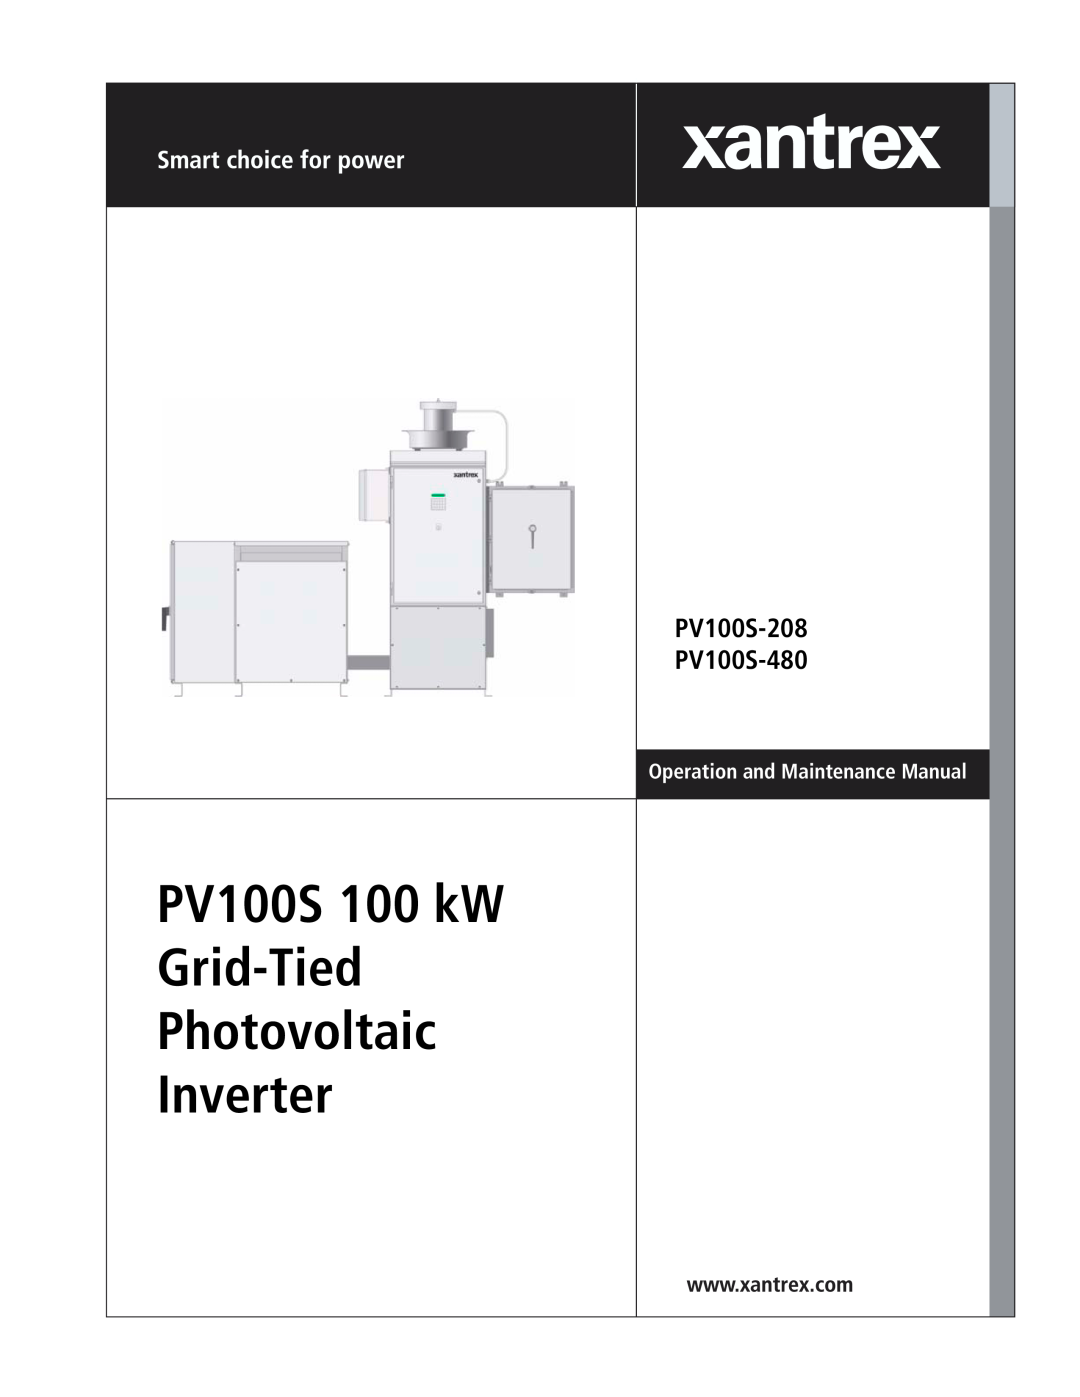 Xantrex Technology manual PV100S 100 kW Grid-Tied Photovoltaic Inverter, PV100S-208 PV100S-480 